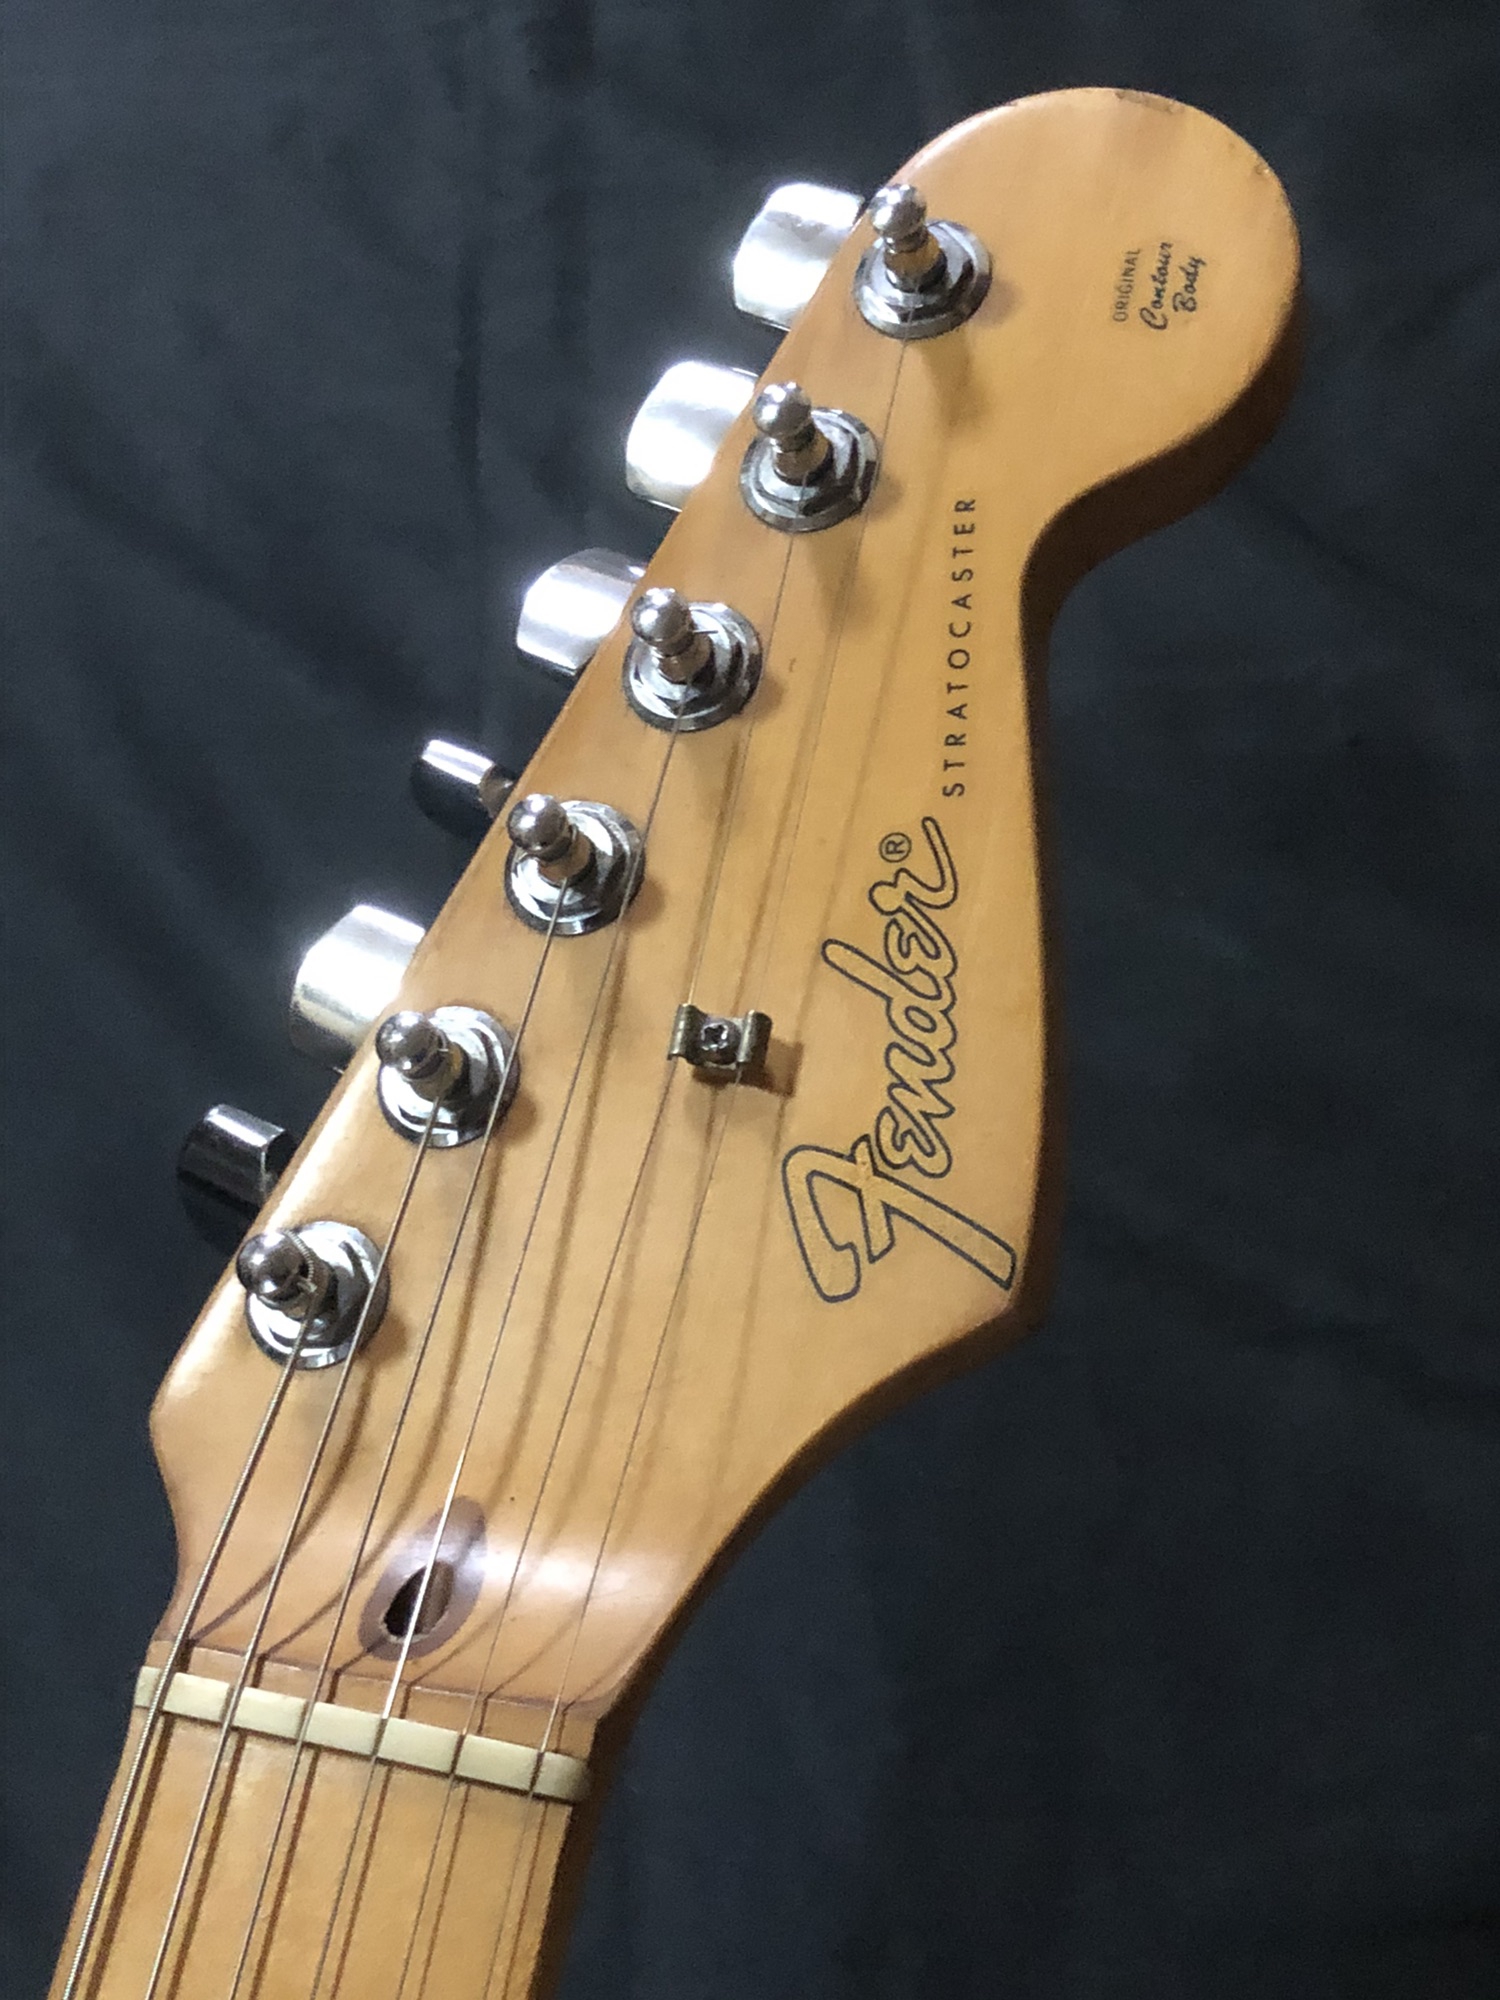 1989 Fender Stratocaster Limiited Edition 〜 Very Rare Guitar / SOLD